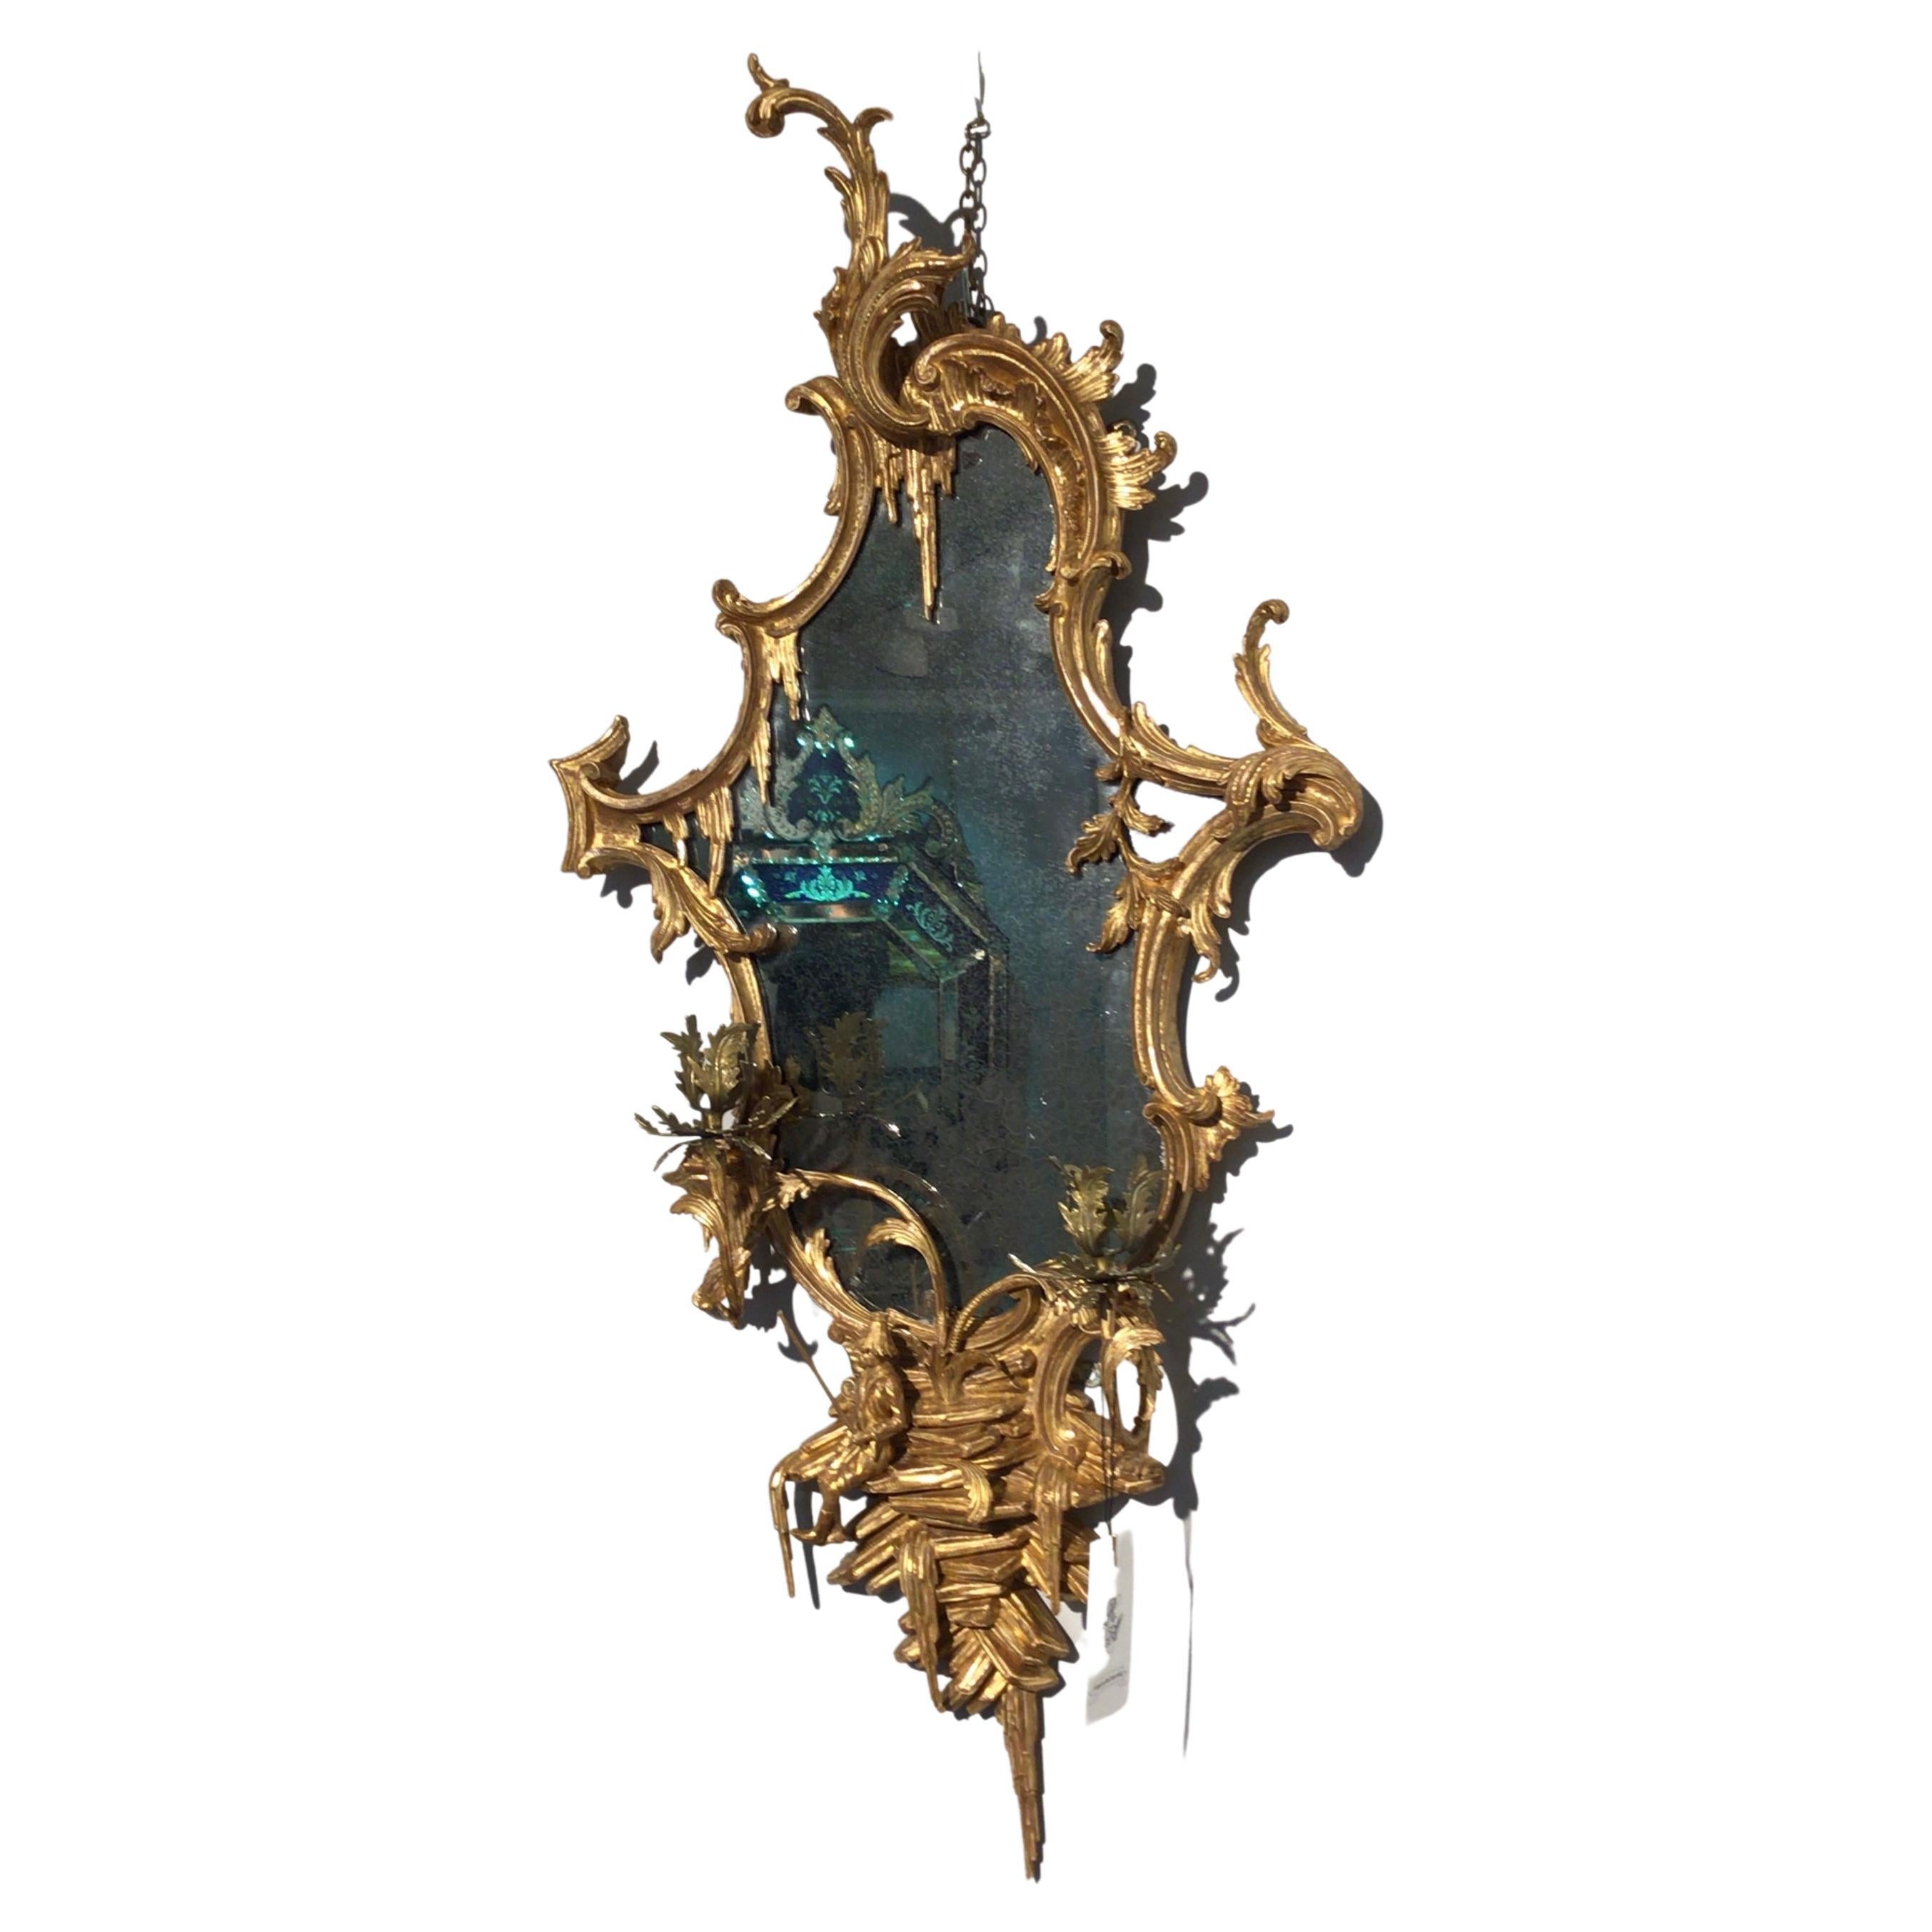 An outstanding Chinese Chippendale carved giltwood girandole, this lovely and entrancing piece is carved in the chinoiserie style, the asymmetric form echoed by the skewed setting of the two single candle arms to either side of the original mirror